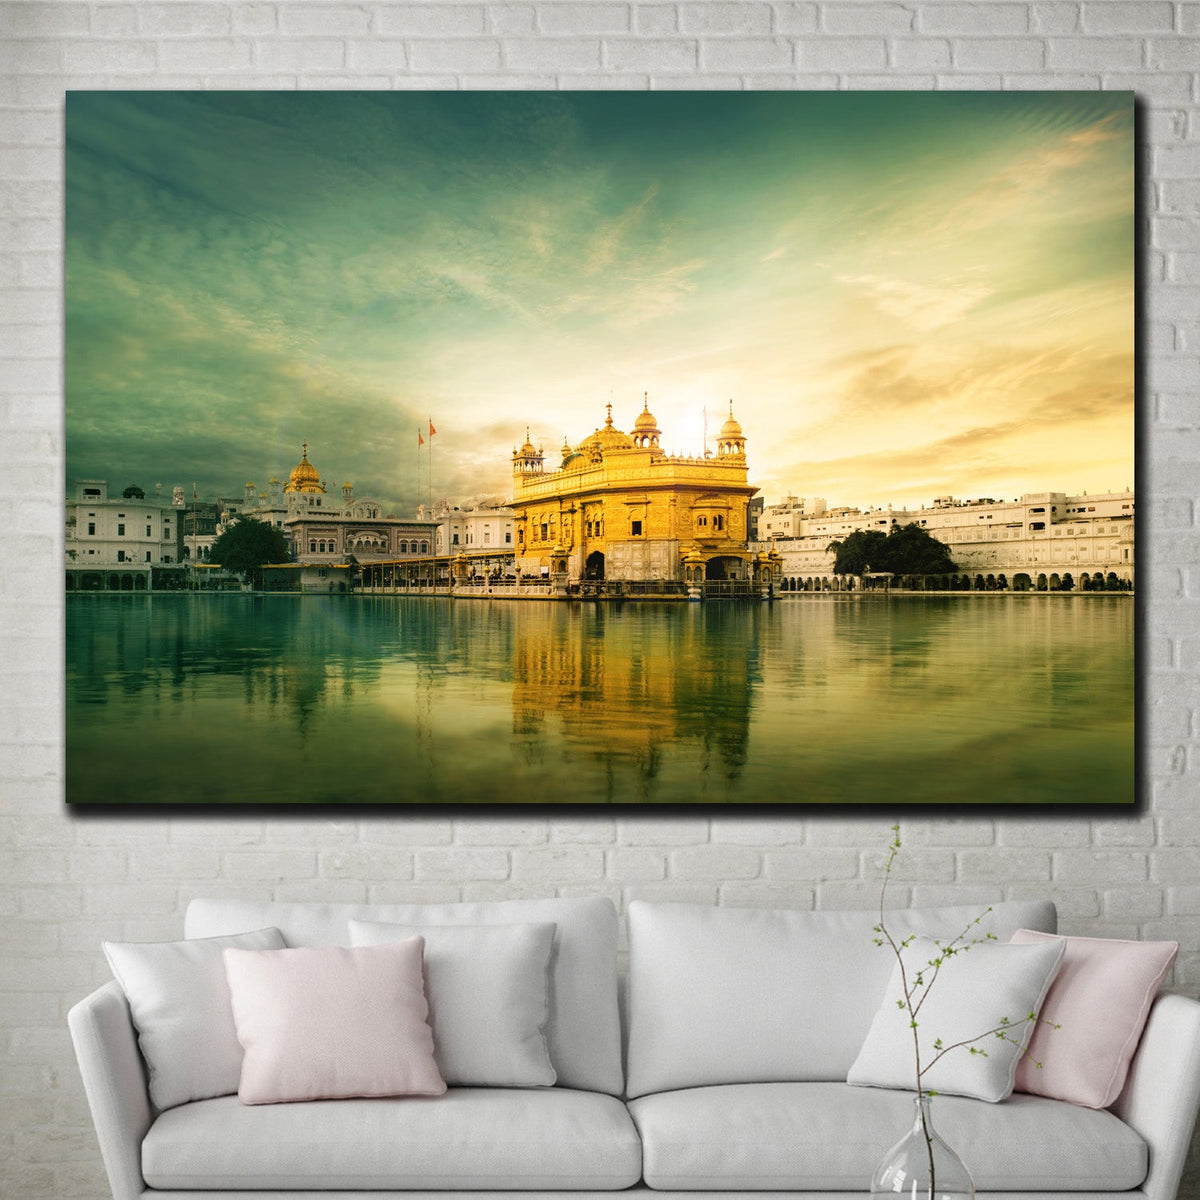 https://cdn.shopify.com/s/files/1/0387/9986/8044/products/GoldenTempleSkylineCanvasArtprintStretched-4.jpg